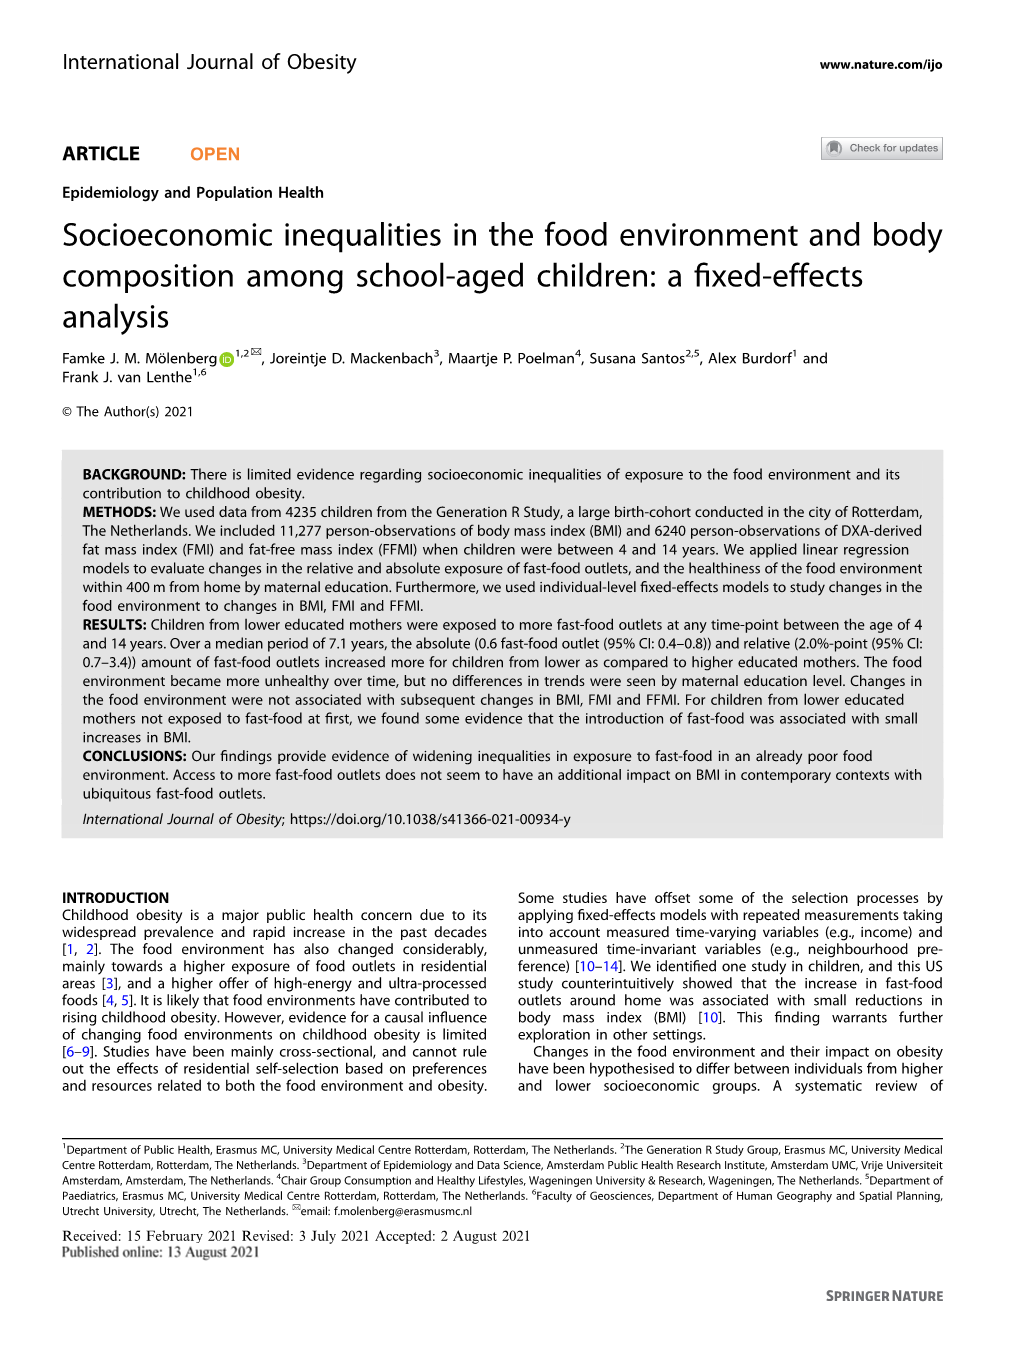 Socioeconomic Inequalities in the Food Environment and Body Composition Among School-Aged Children: a ﬁxed-Effects Analysis ✉ Famke J